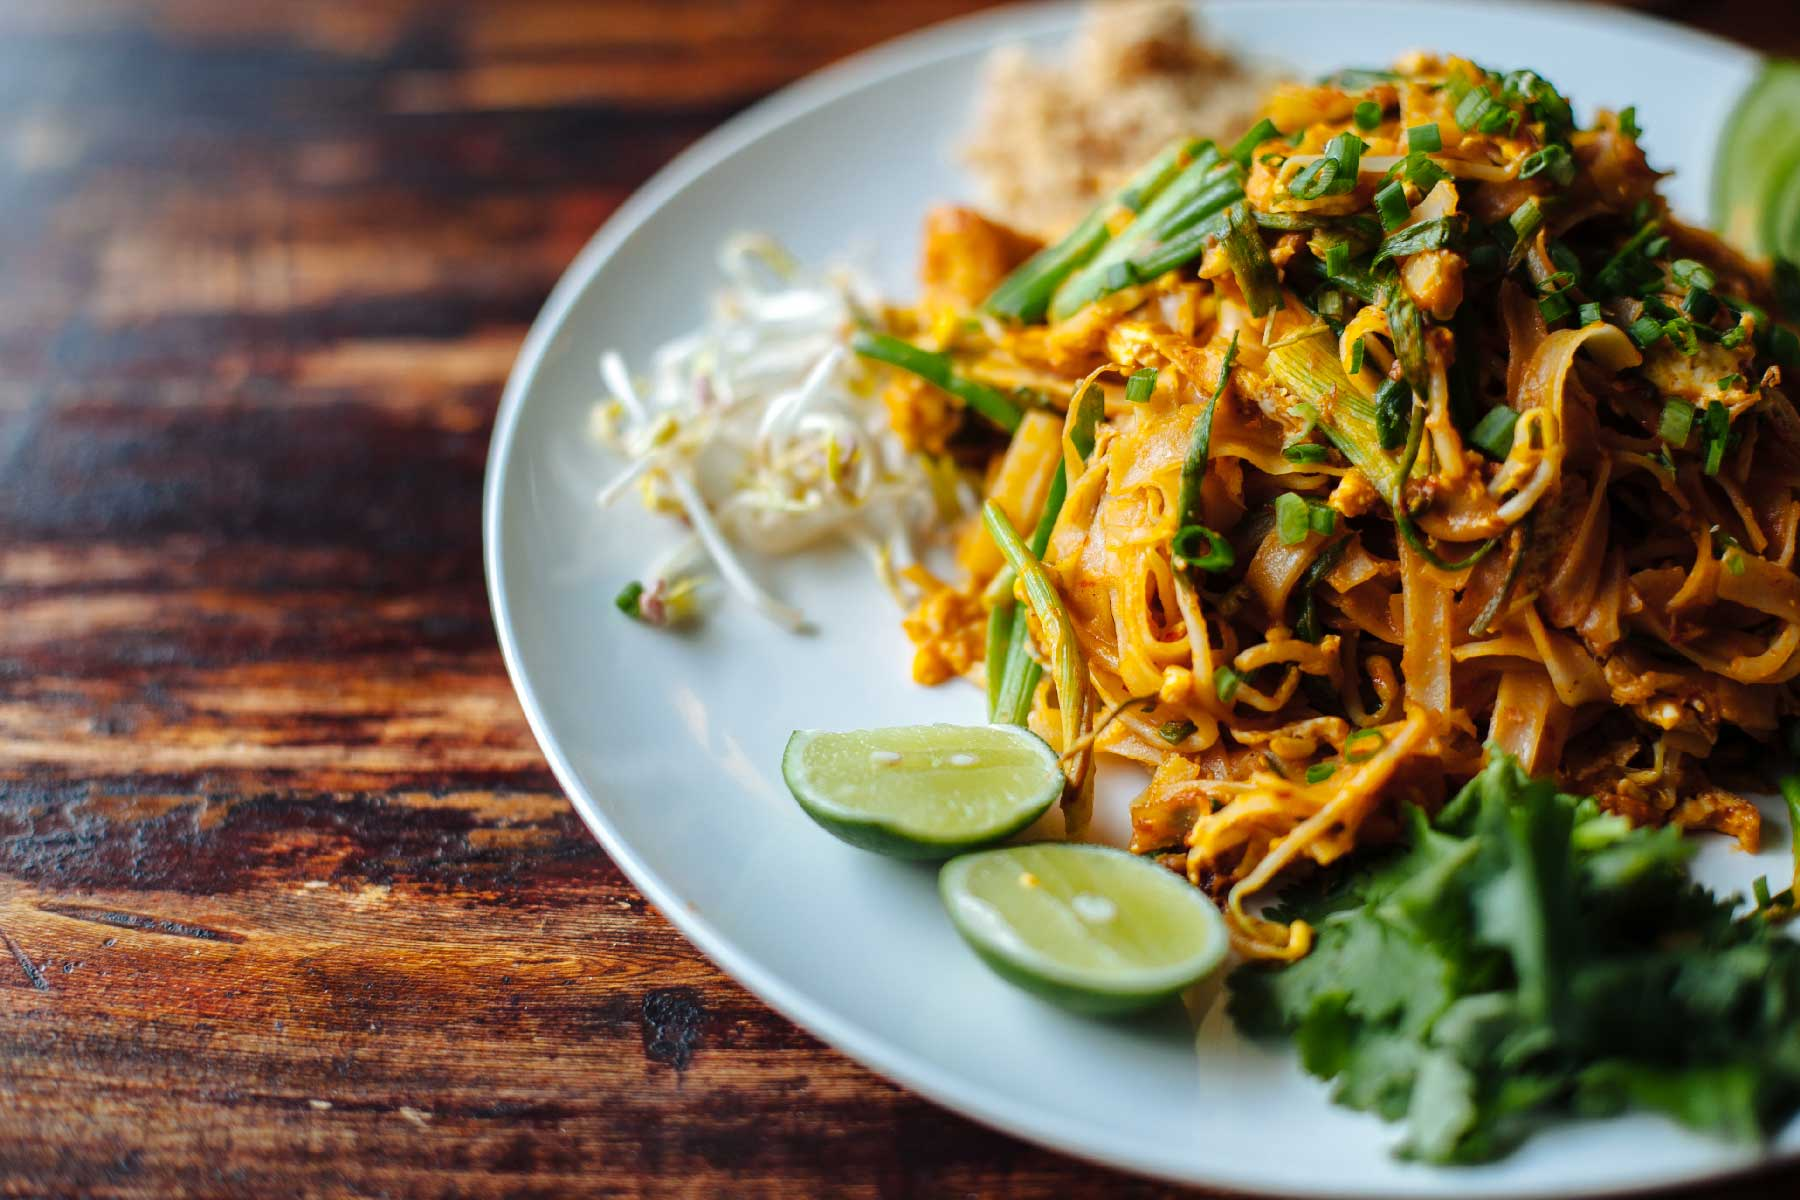 Delicious Thai meals packed with nutritional benefits